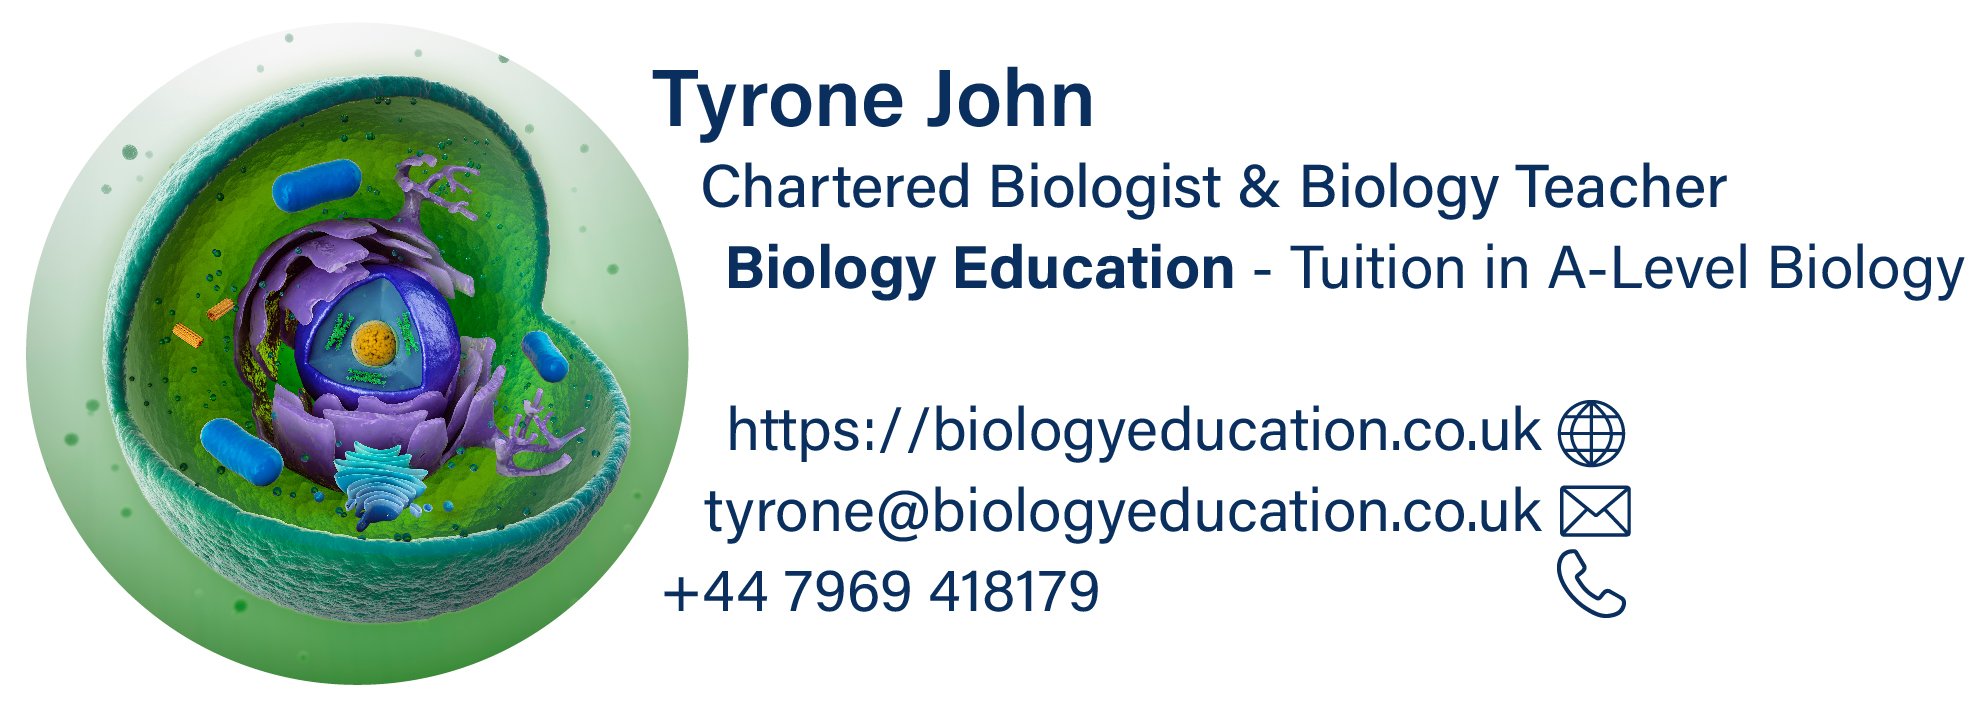 A-level biology tuition